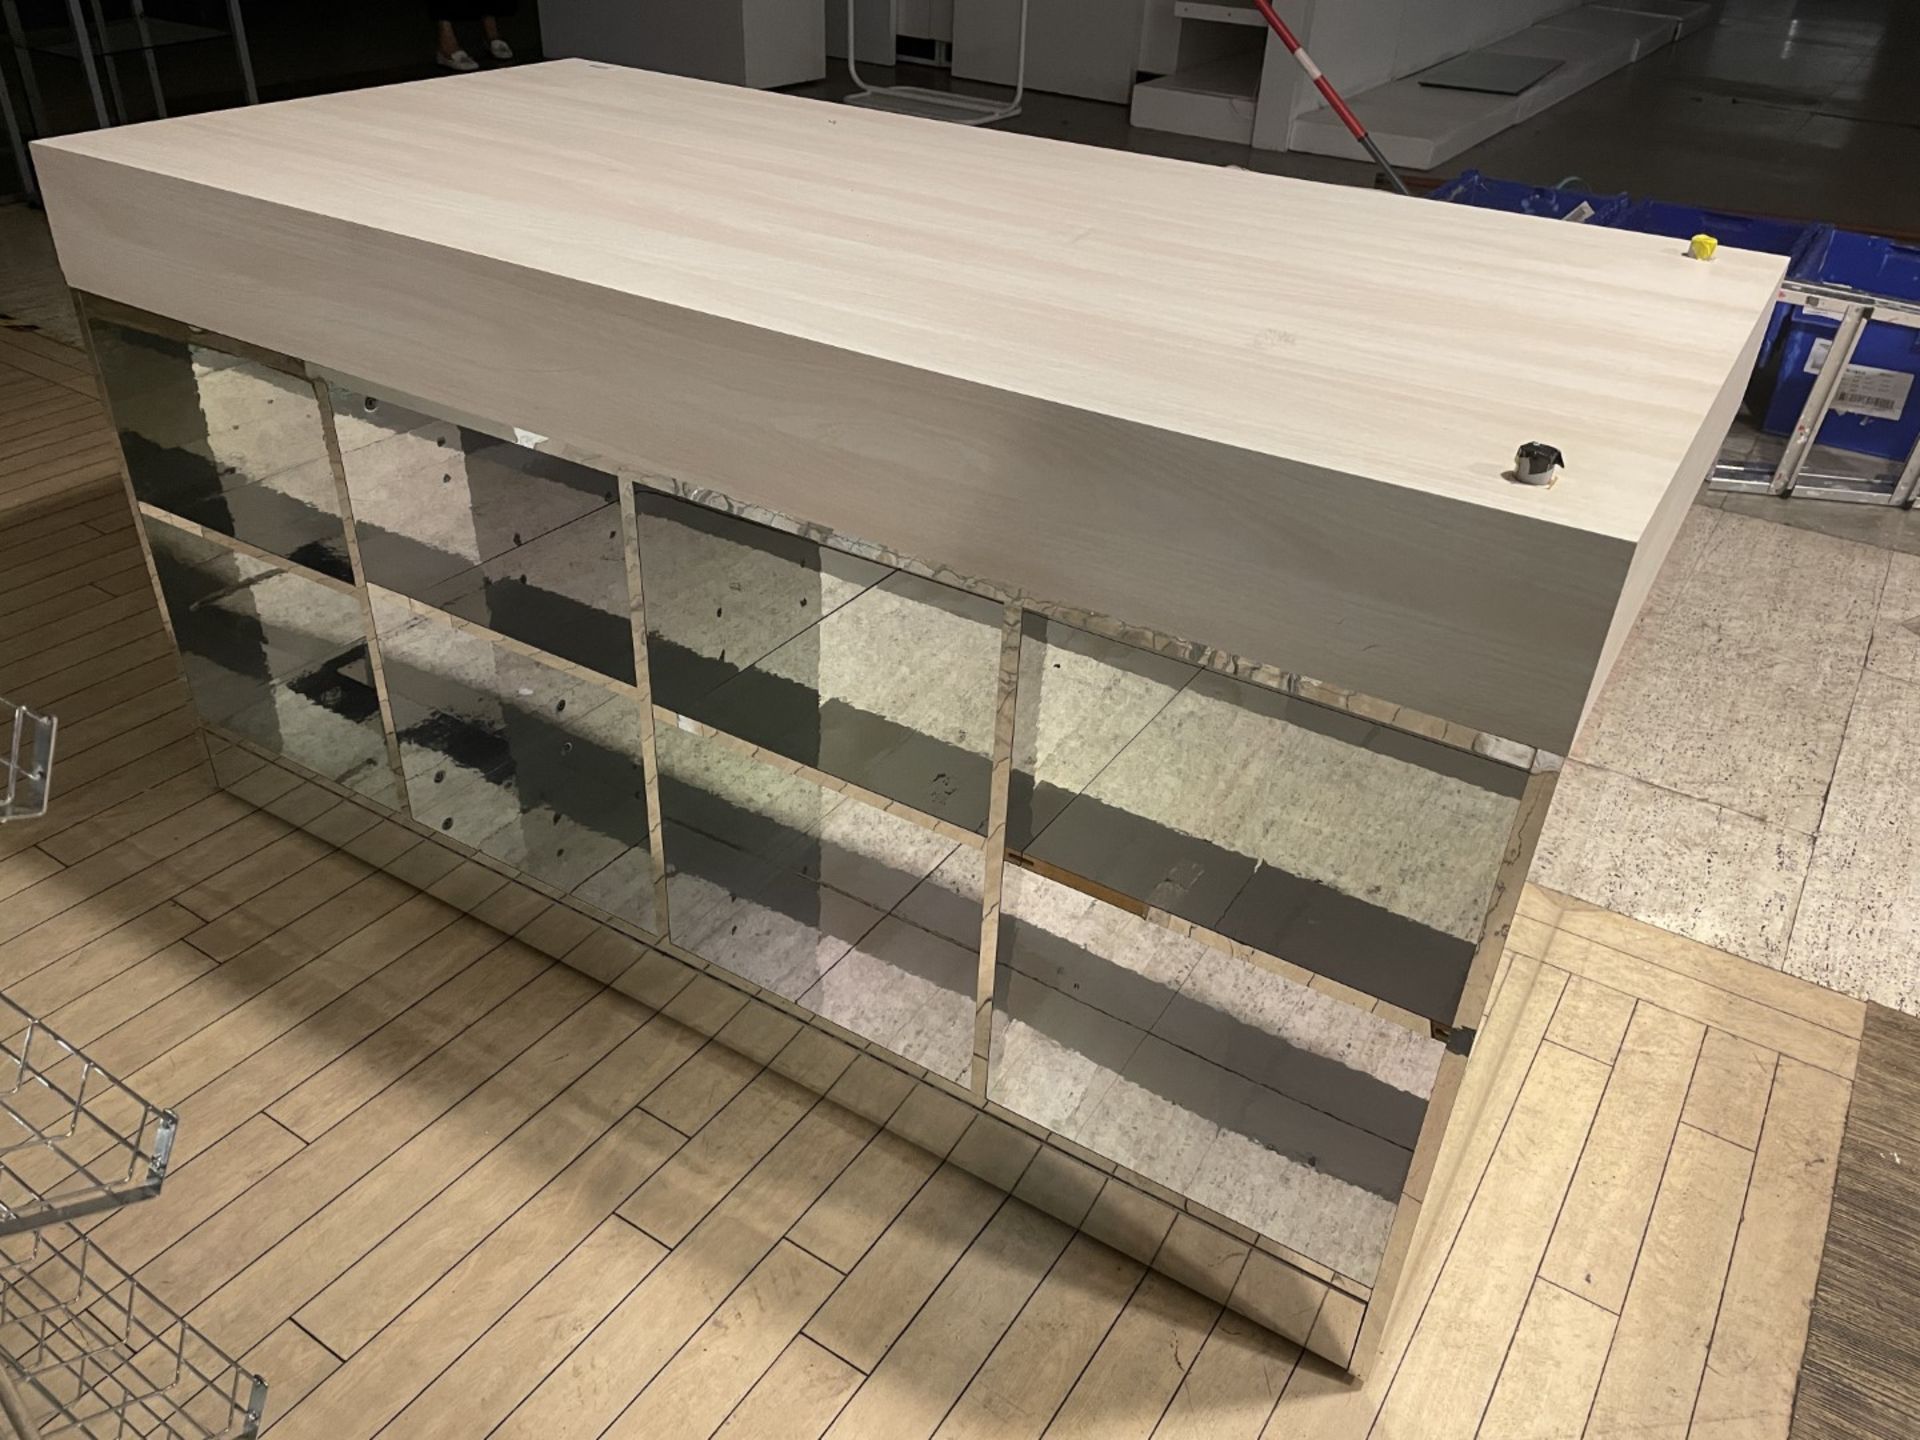 1 x Retail Display Island With Ash Wooden Top and Mirrored Side Shelves and Panels - Size 82 x - Image 6 of 6